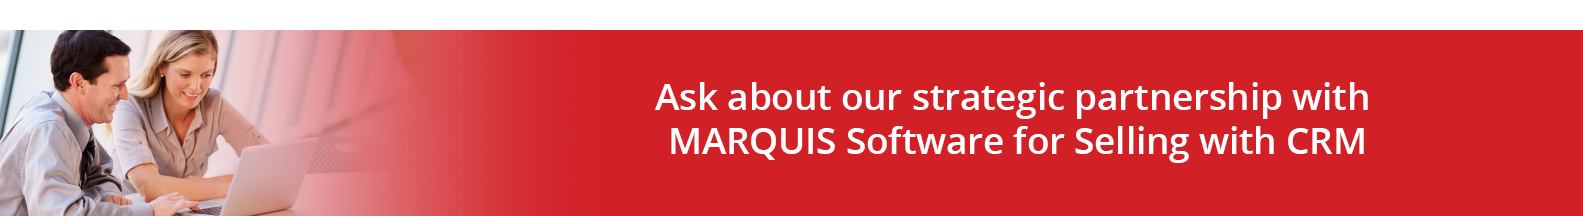 Ask about our strategic partnership with MARQUIS Software for Selling with CRM